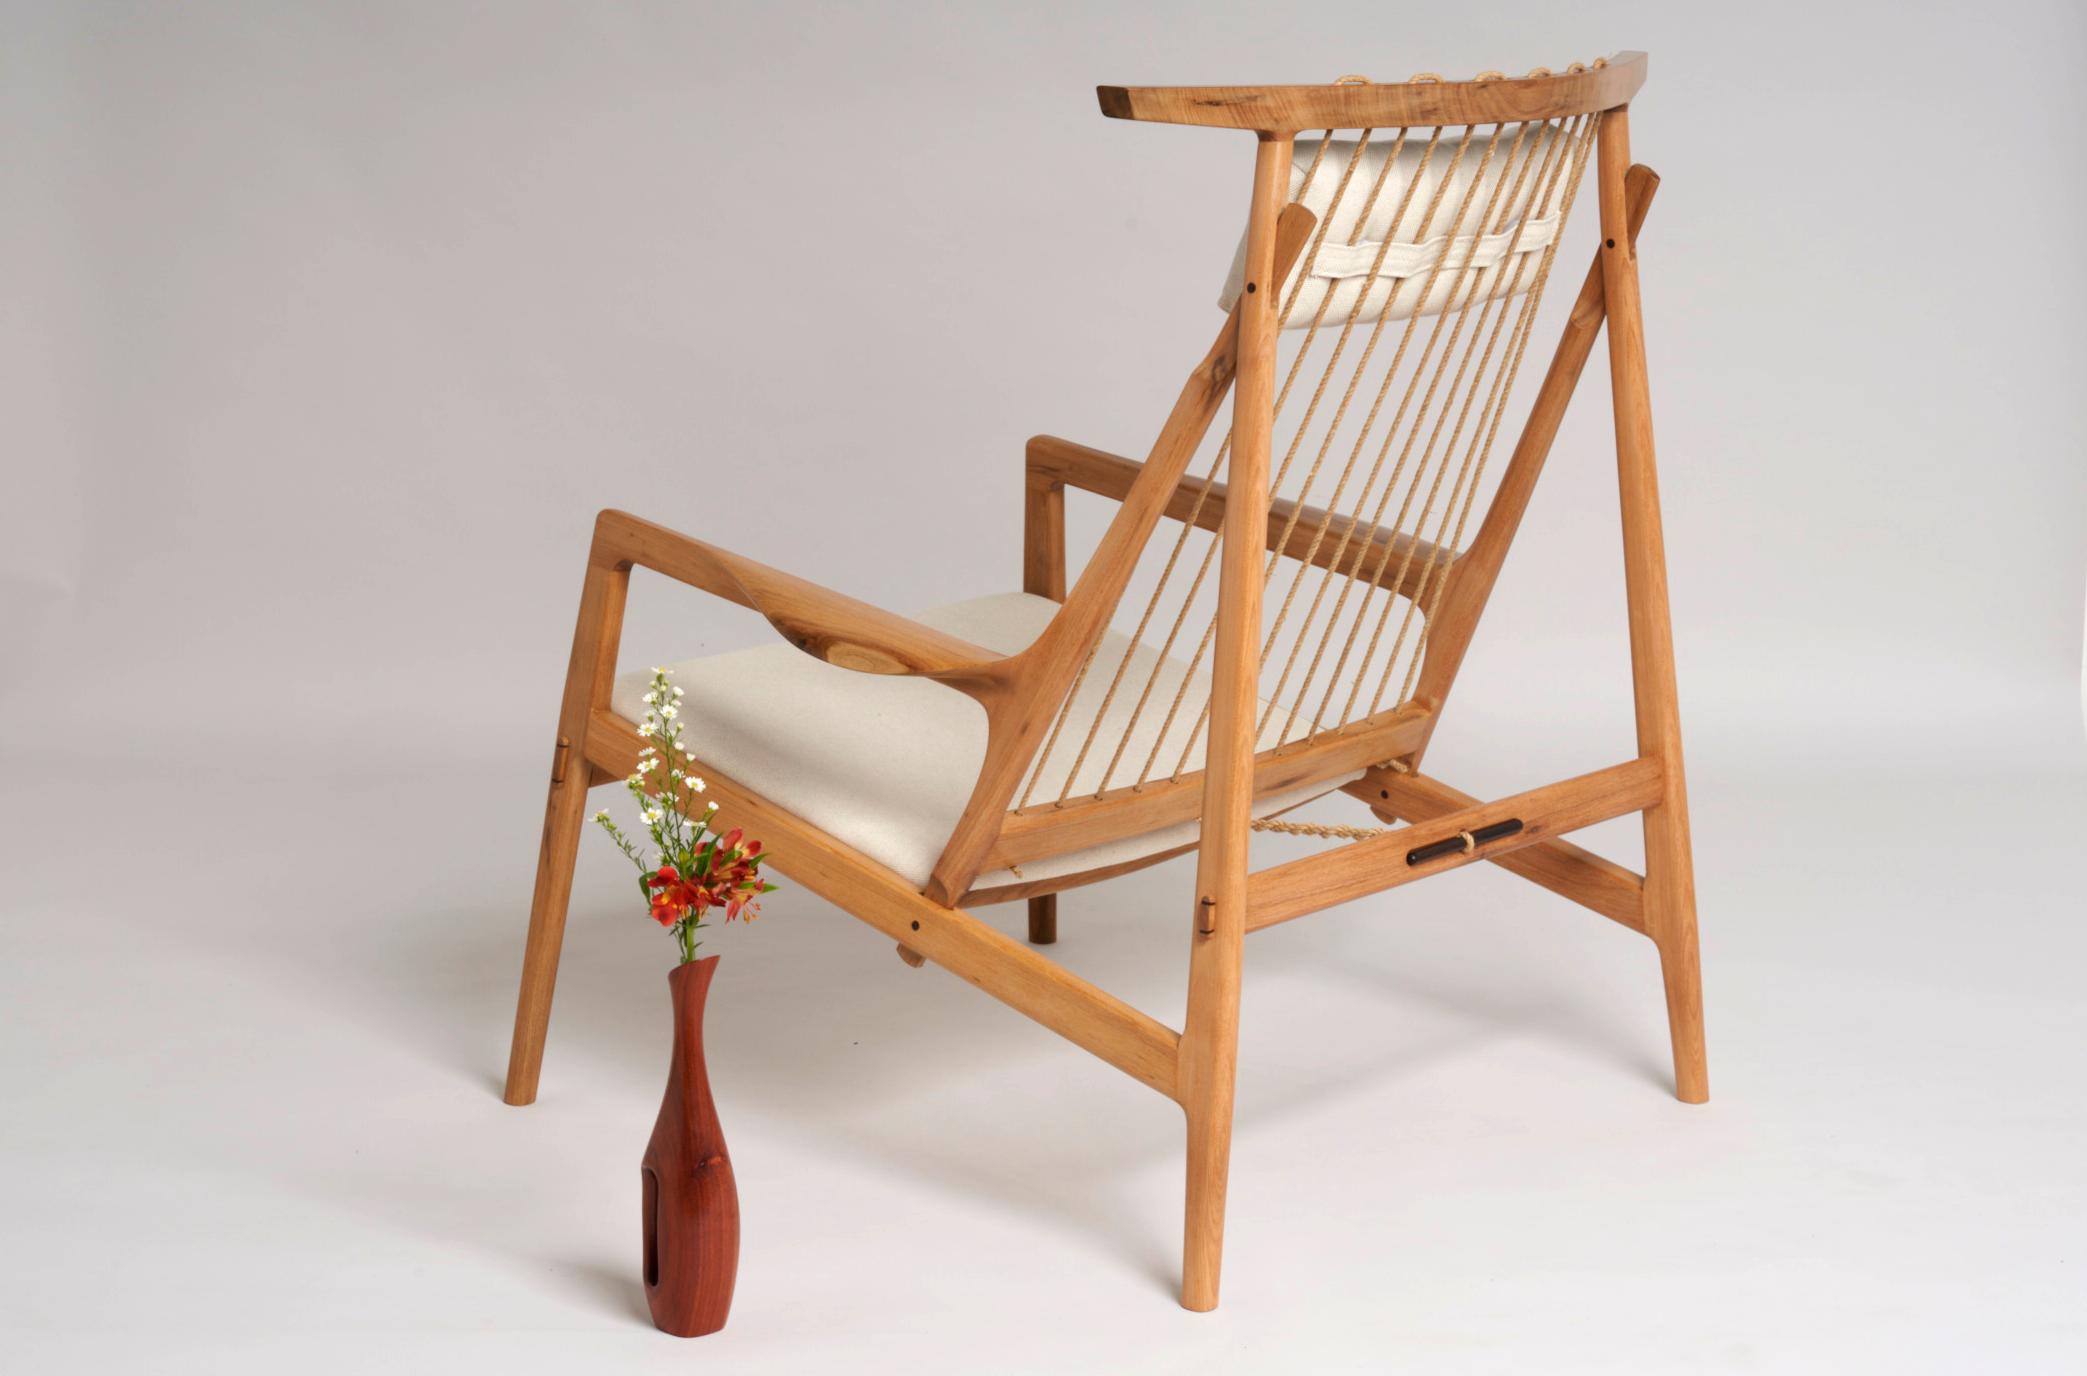 Hand-Crafted Contemporary Armchair in Tropical Hardwood by Ricardo Graham Ferreira For Sale